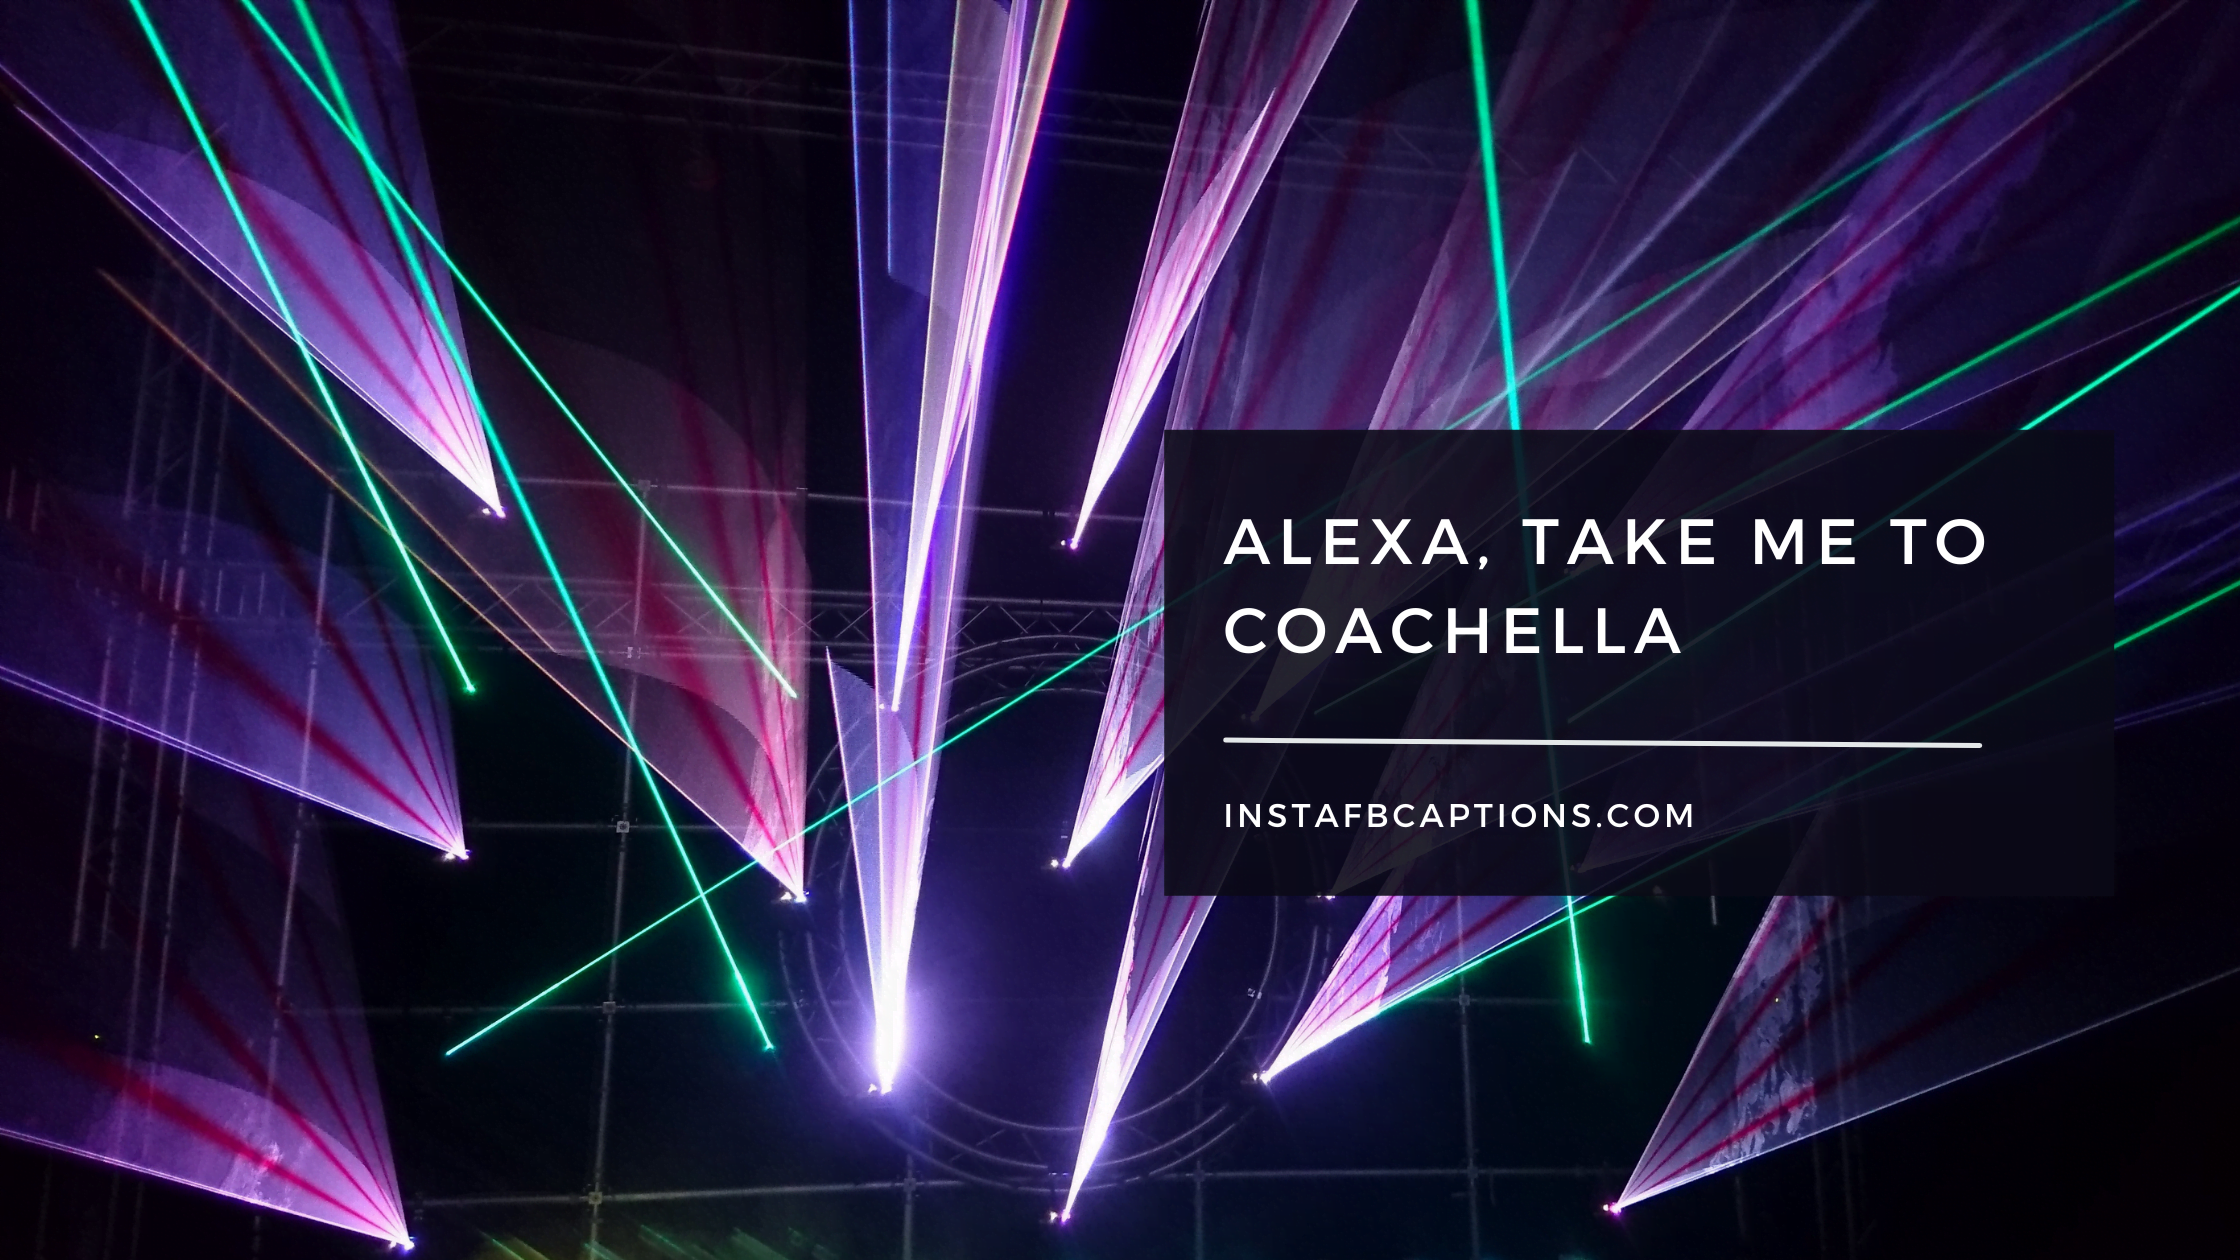 Some Witty Coachella Captions  - Some Witty Coachella Captions  - Best Coachella Instagram Captions in 2023